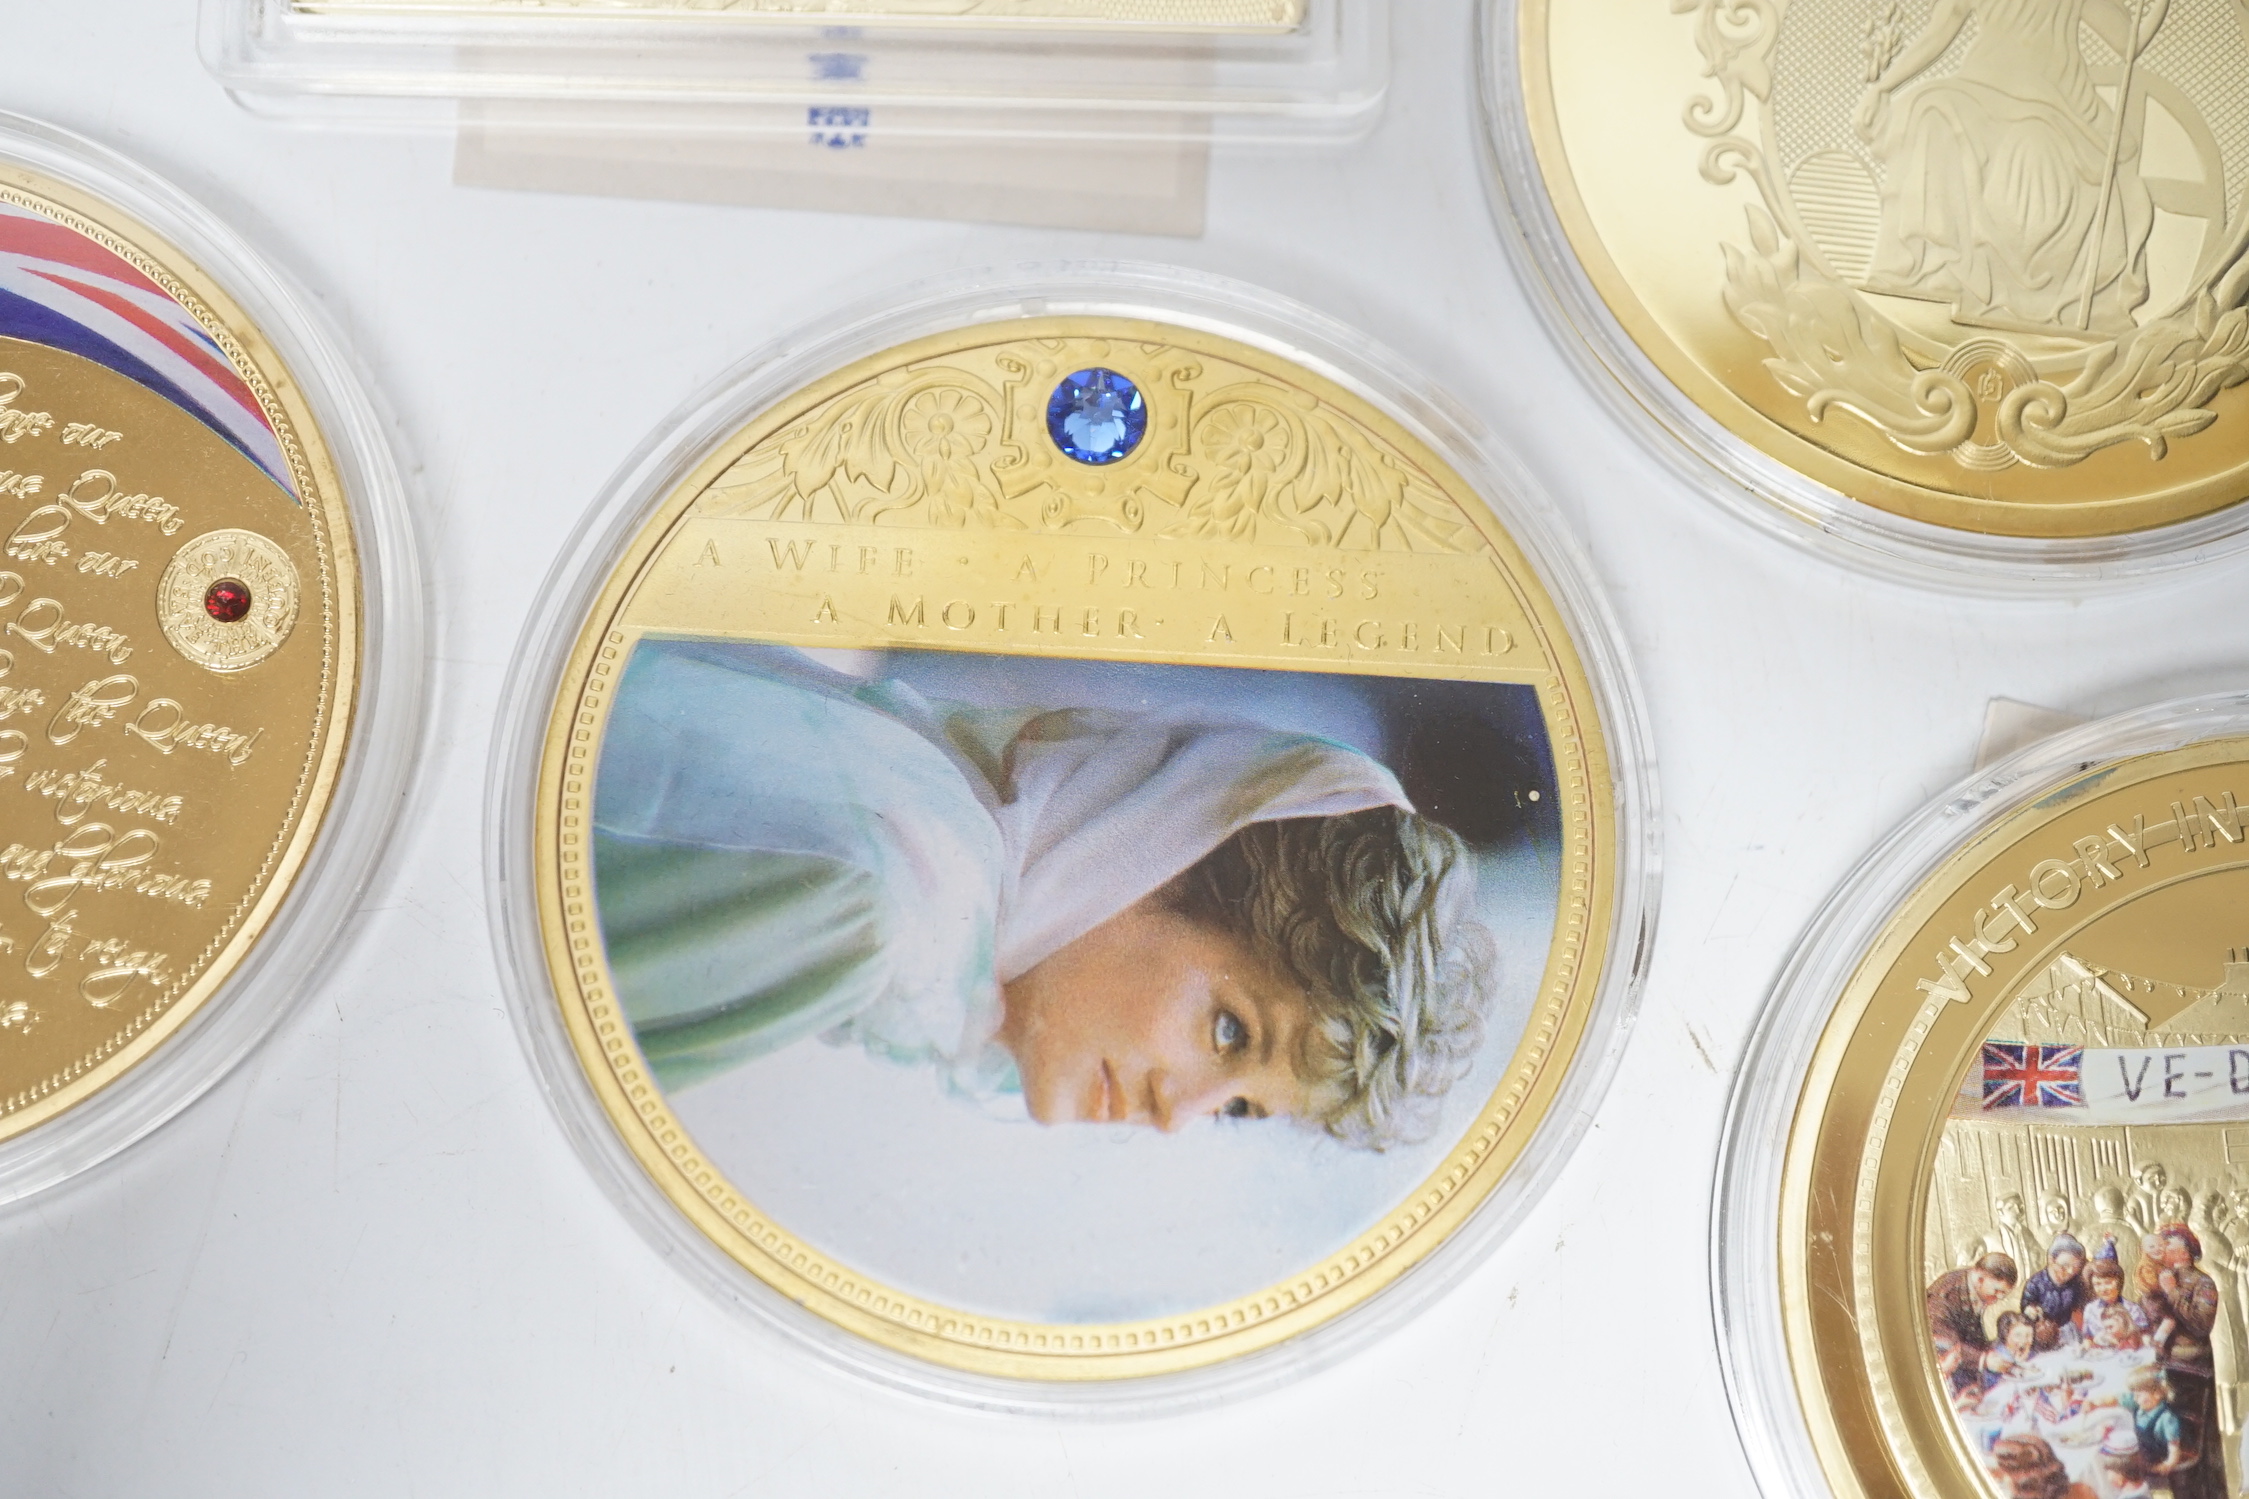 Five large gold plated commemorative medallions for VE Day, Princess Diana, The Queen, etc.